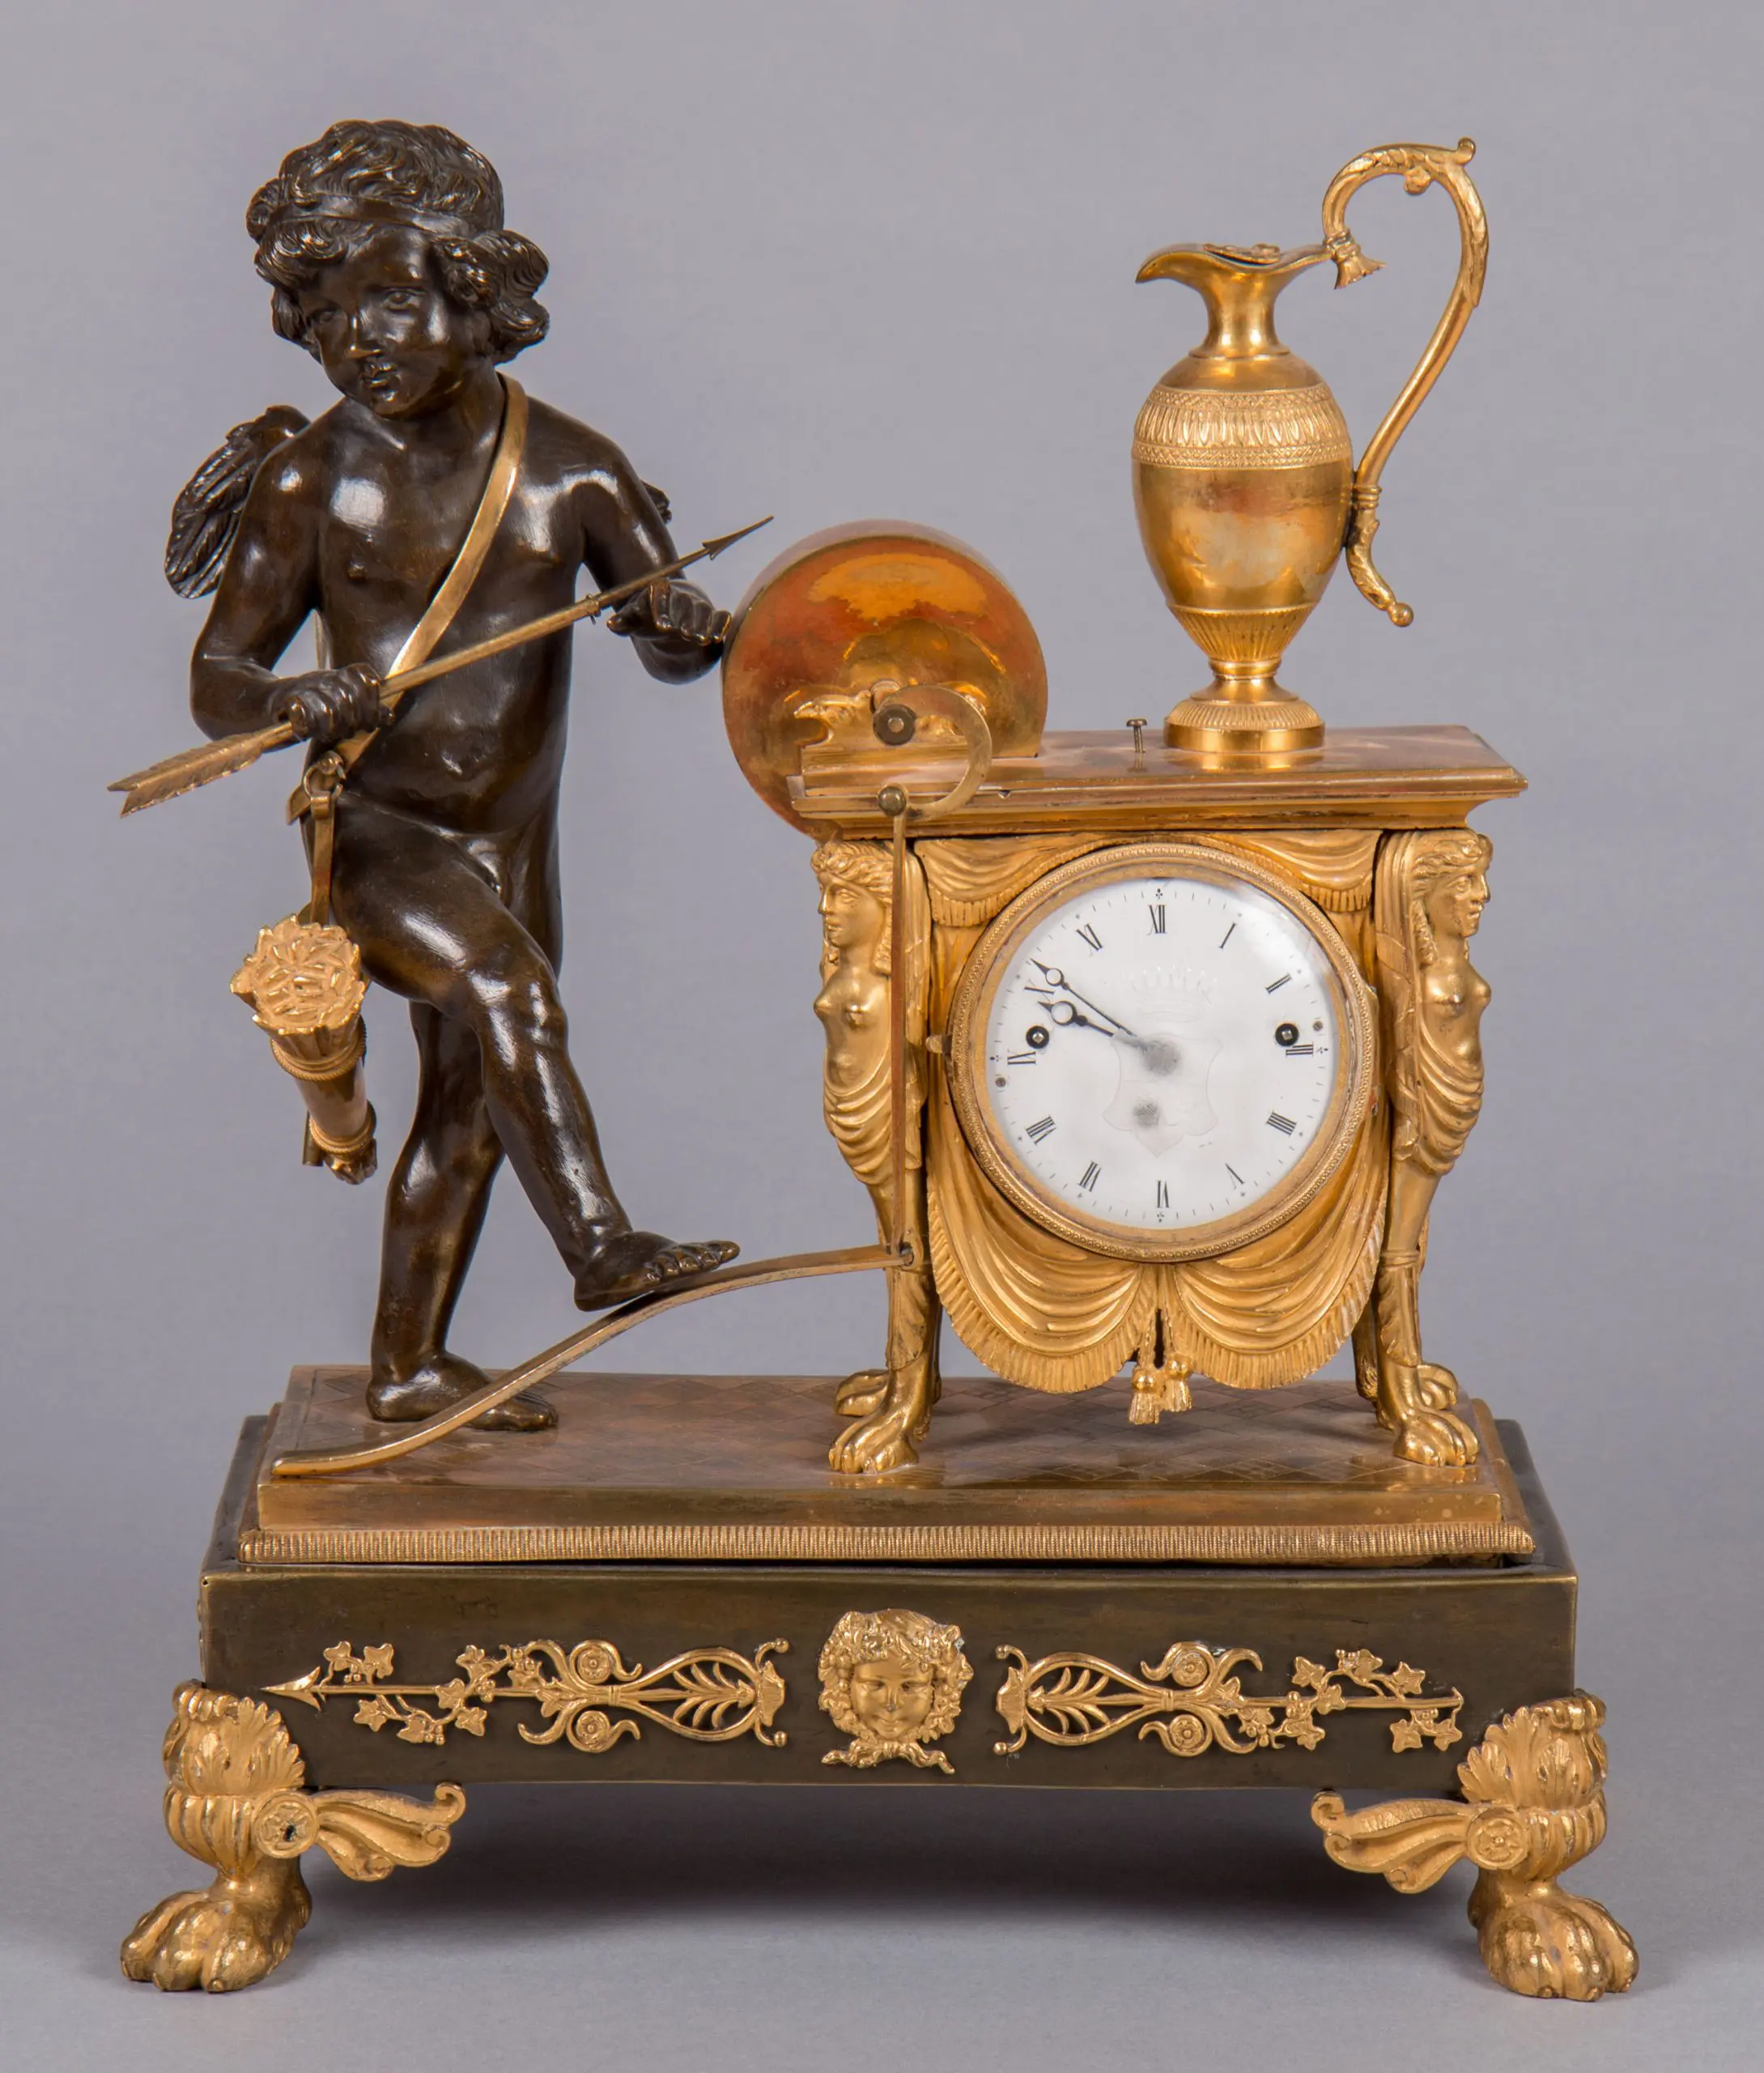 “Amor” Andréewitch empire Stephan mantel clock - Figural